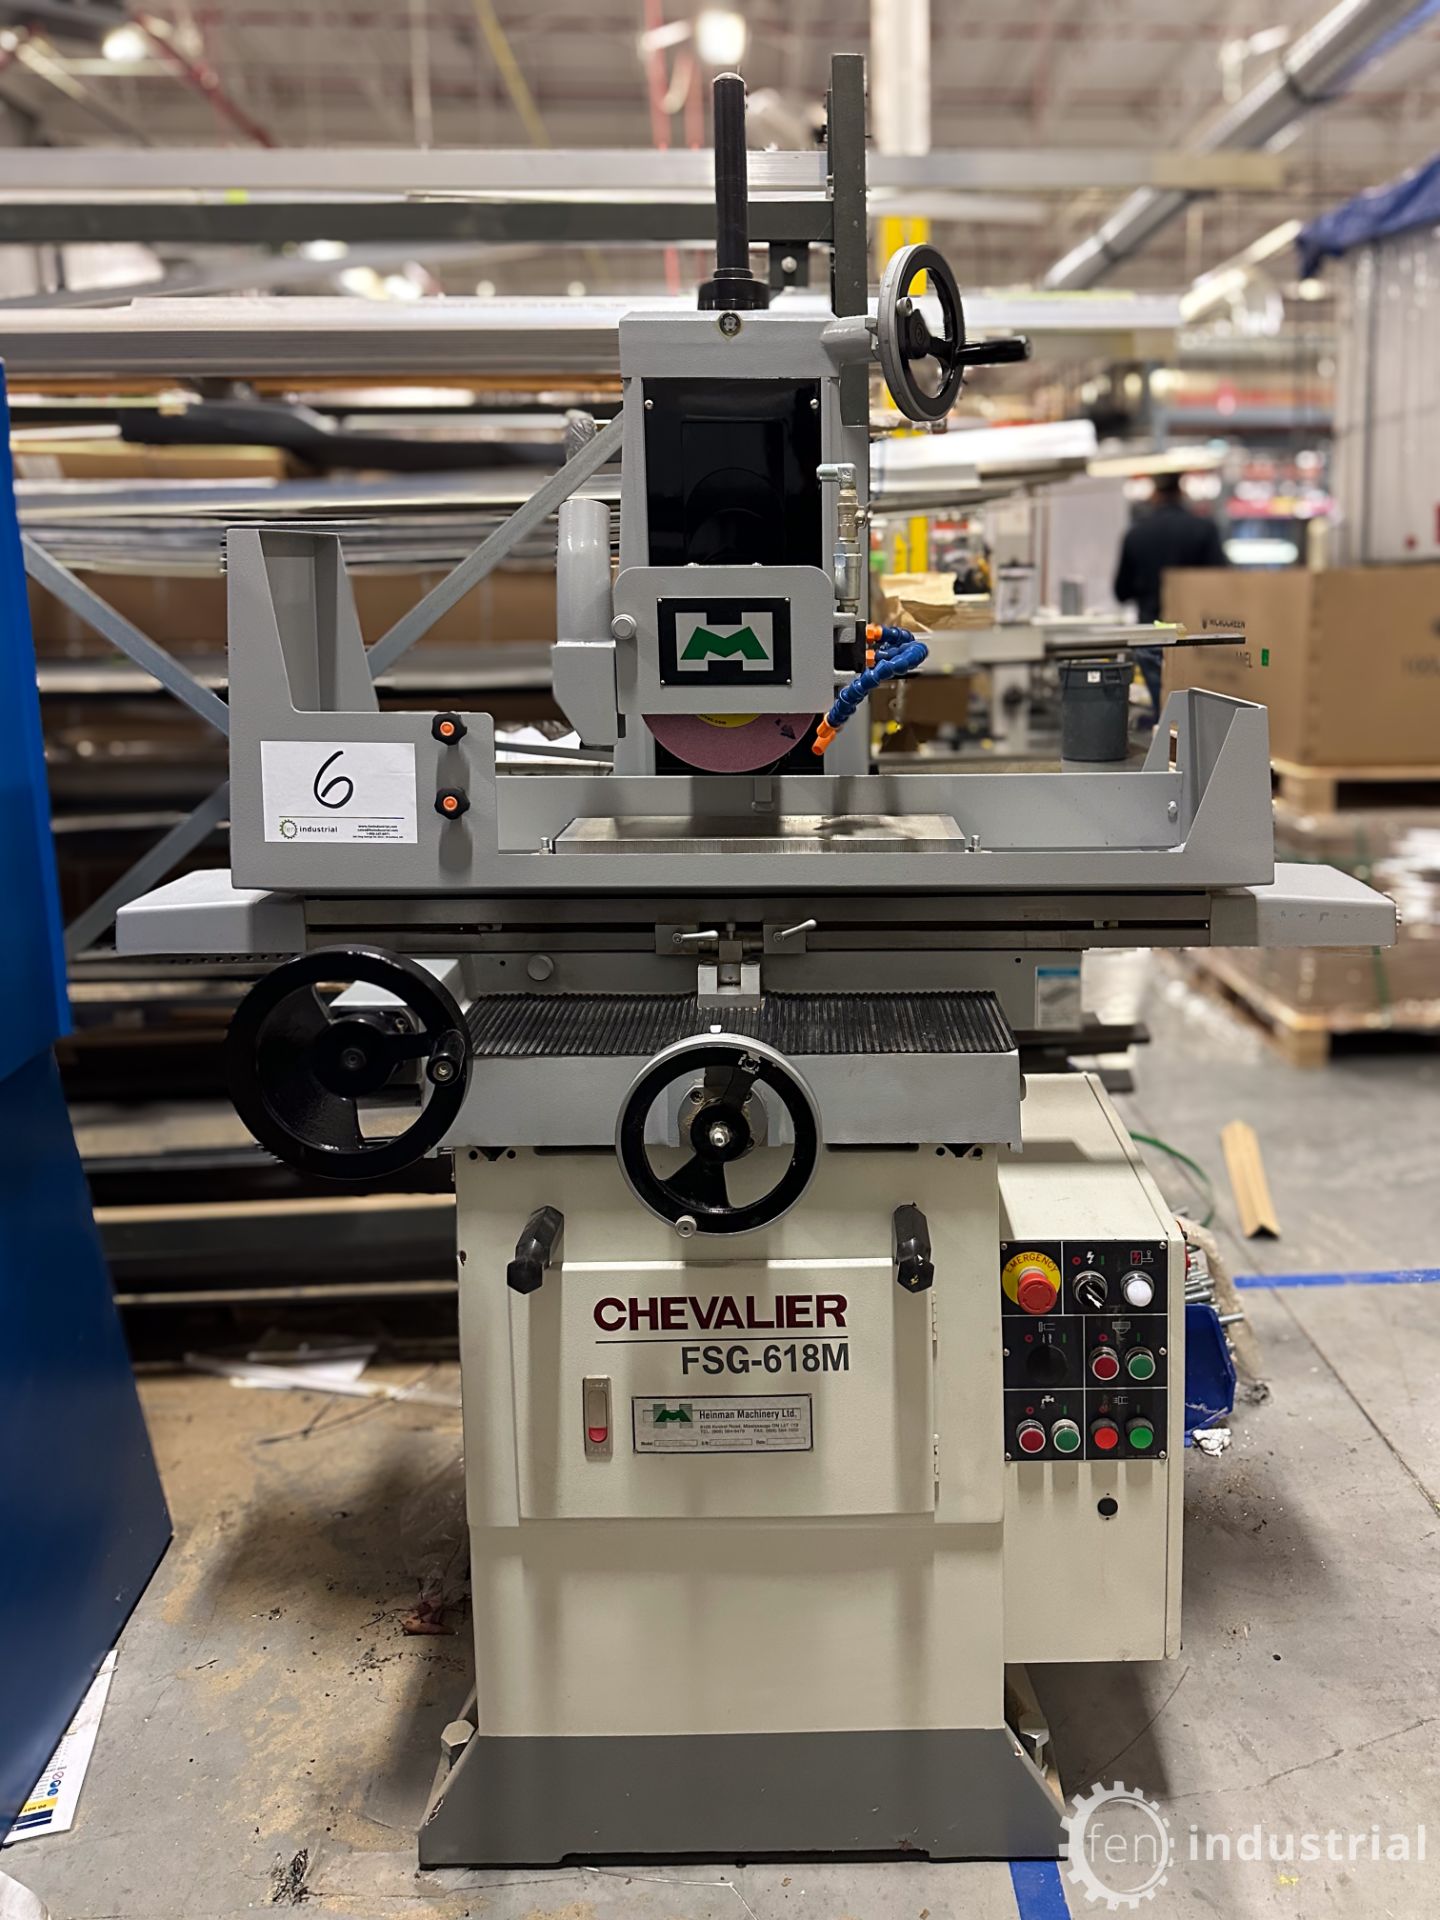 NEW / UNUSED CHEVALIER FSG-618M MANUAL SURFACE GRINDER, 6” X 18” MAGNETIC CHUCK, S/N FA3185015